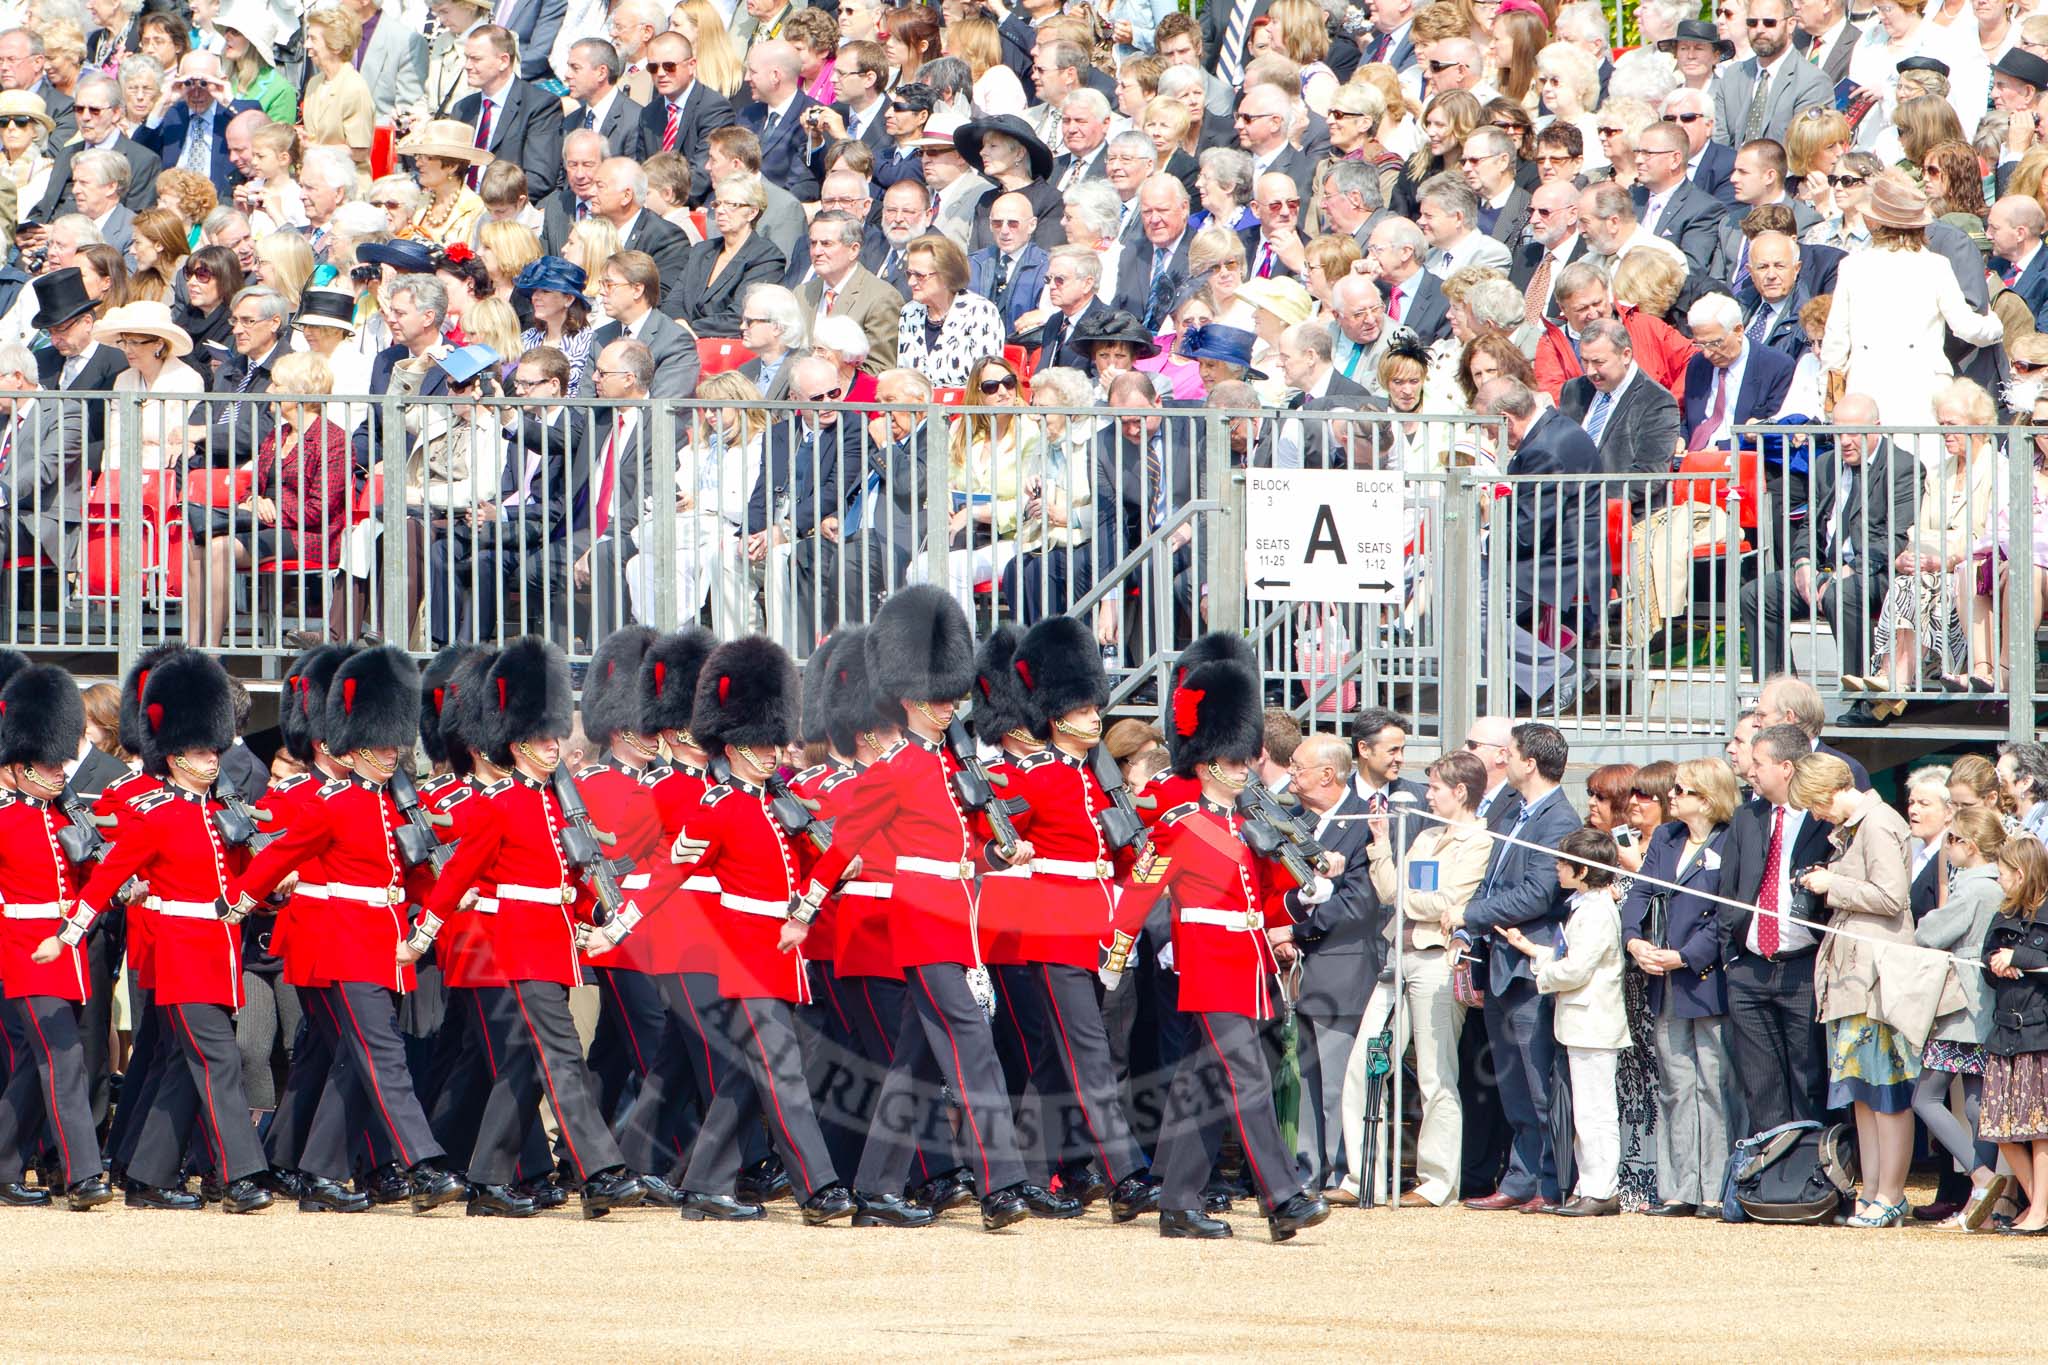 Trooping the Colour 2011: No. 6 Guard, No. 7 Company,  Coldstream Guards, is led into their initial position on the parade ground by Company Sergeant Major D J Cox..
Horse Guards Parade, Westminster,
London SW1,
Greater London,
United Kingdom,
on 11 June 2011 at 10:26, image #31